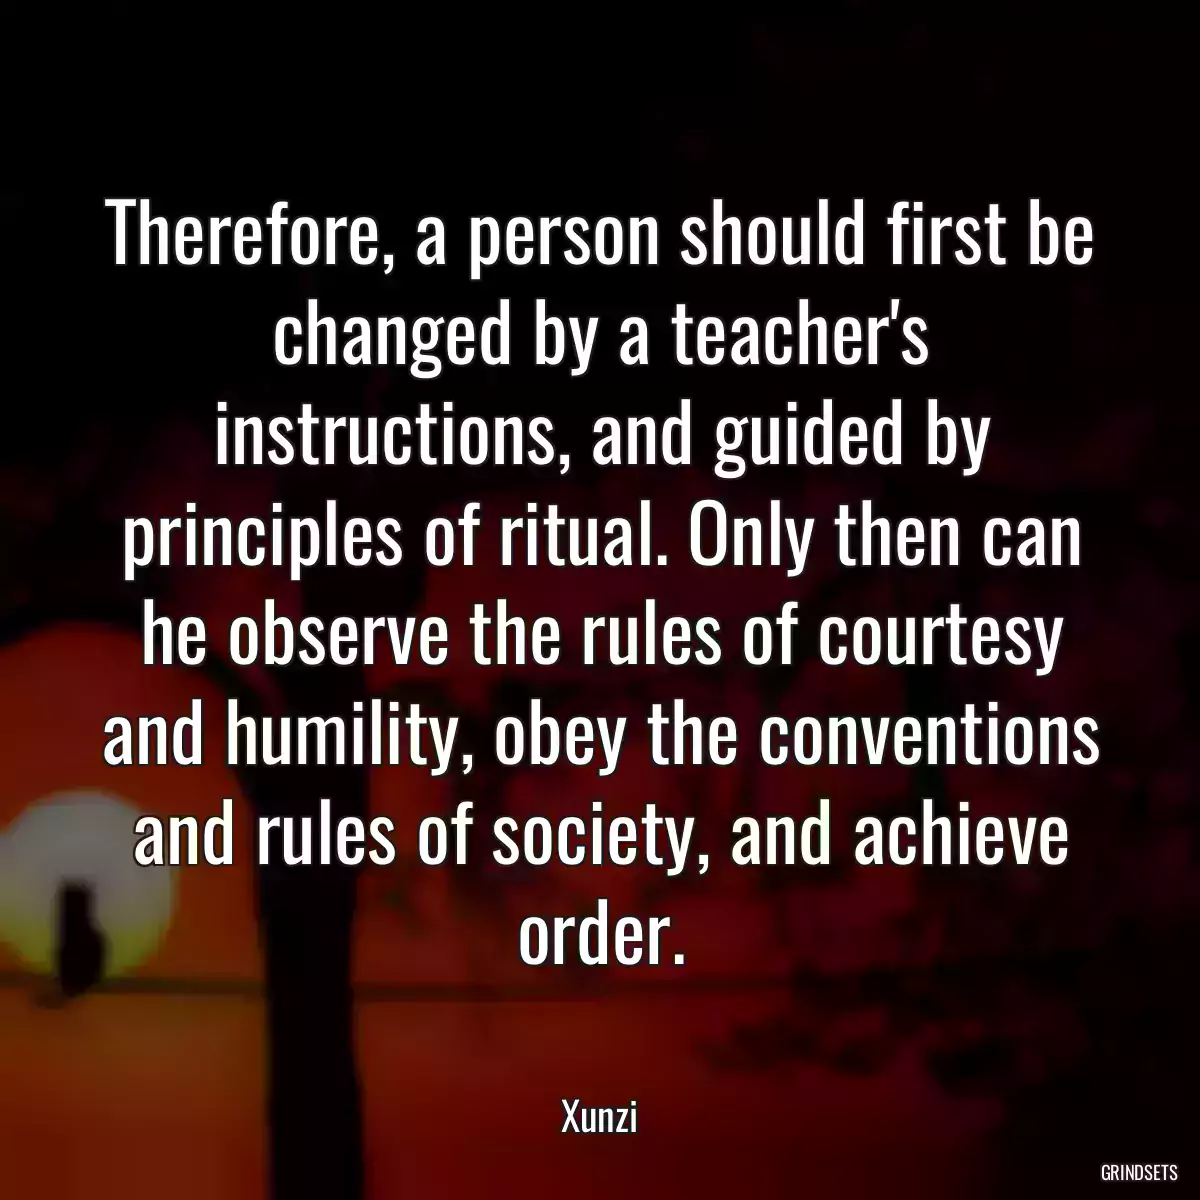 Therefore, a person should first be changed by a teacher\'s instructions, and guided by principles of ritual. Only then can he observe the rules of courtesy and humility, obey the conventions and rules of society, and achieve order.